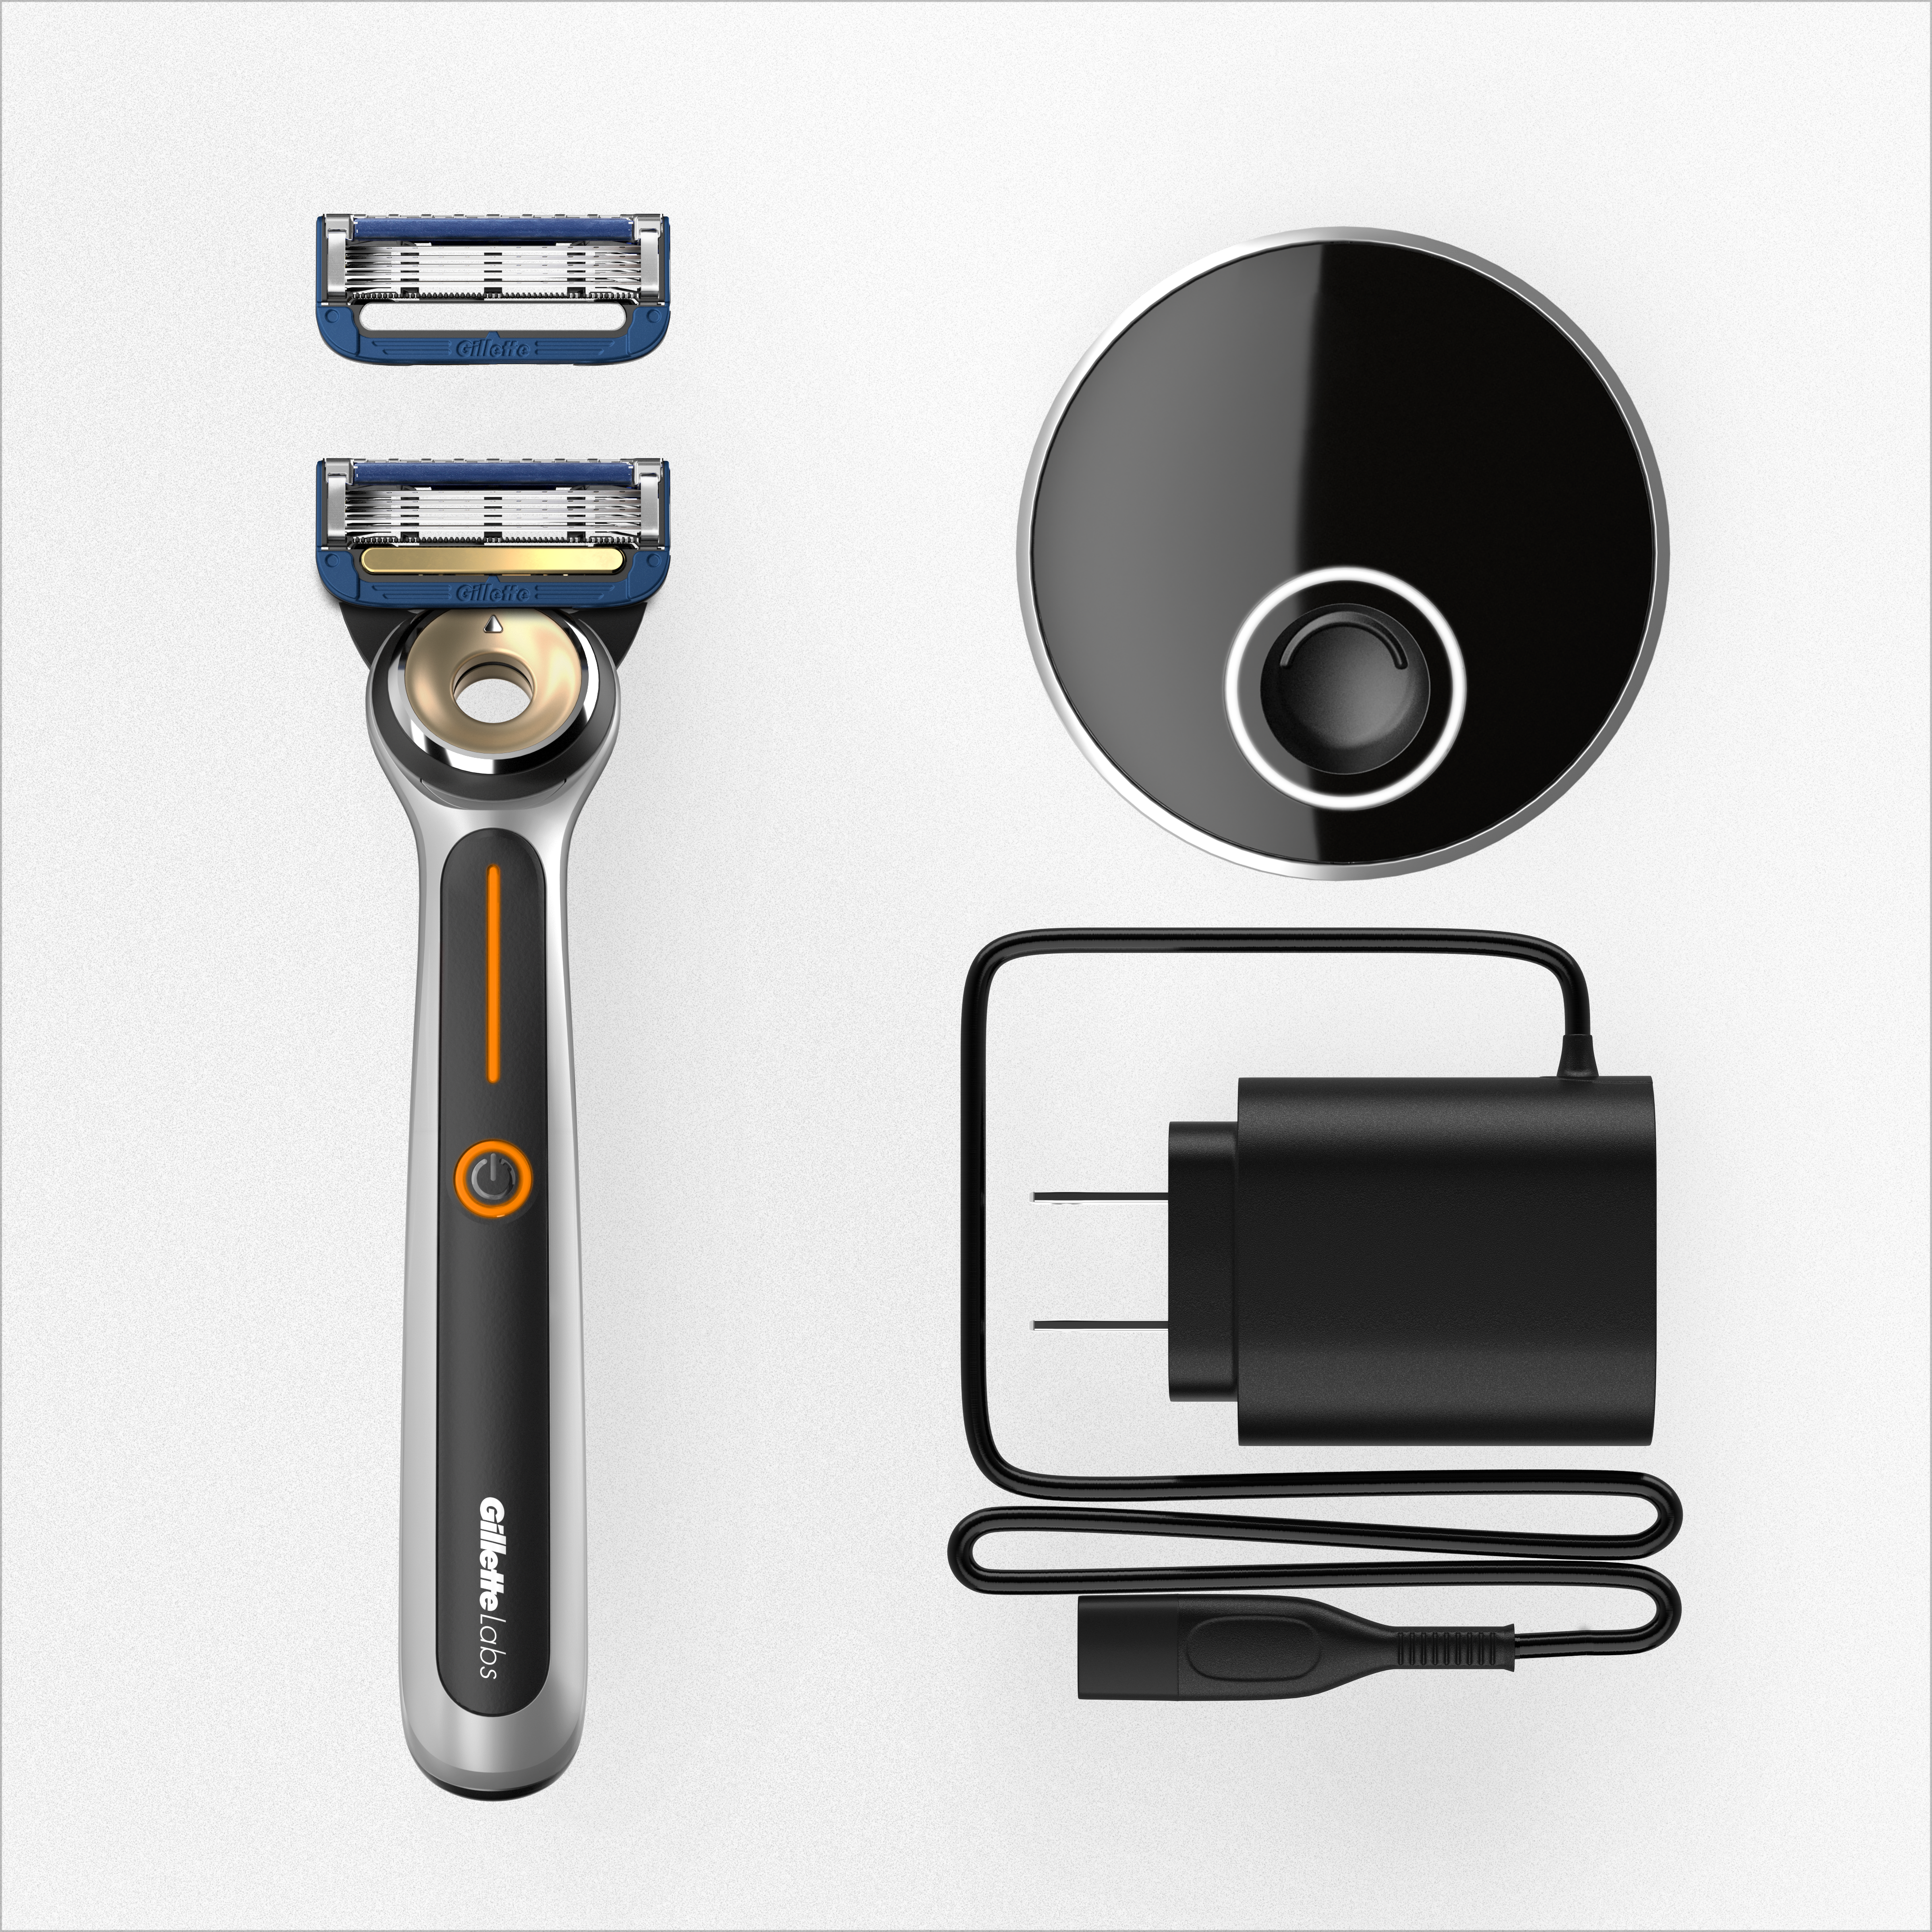 Heated Razor By GilletteLabs - Image 2